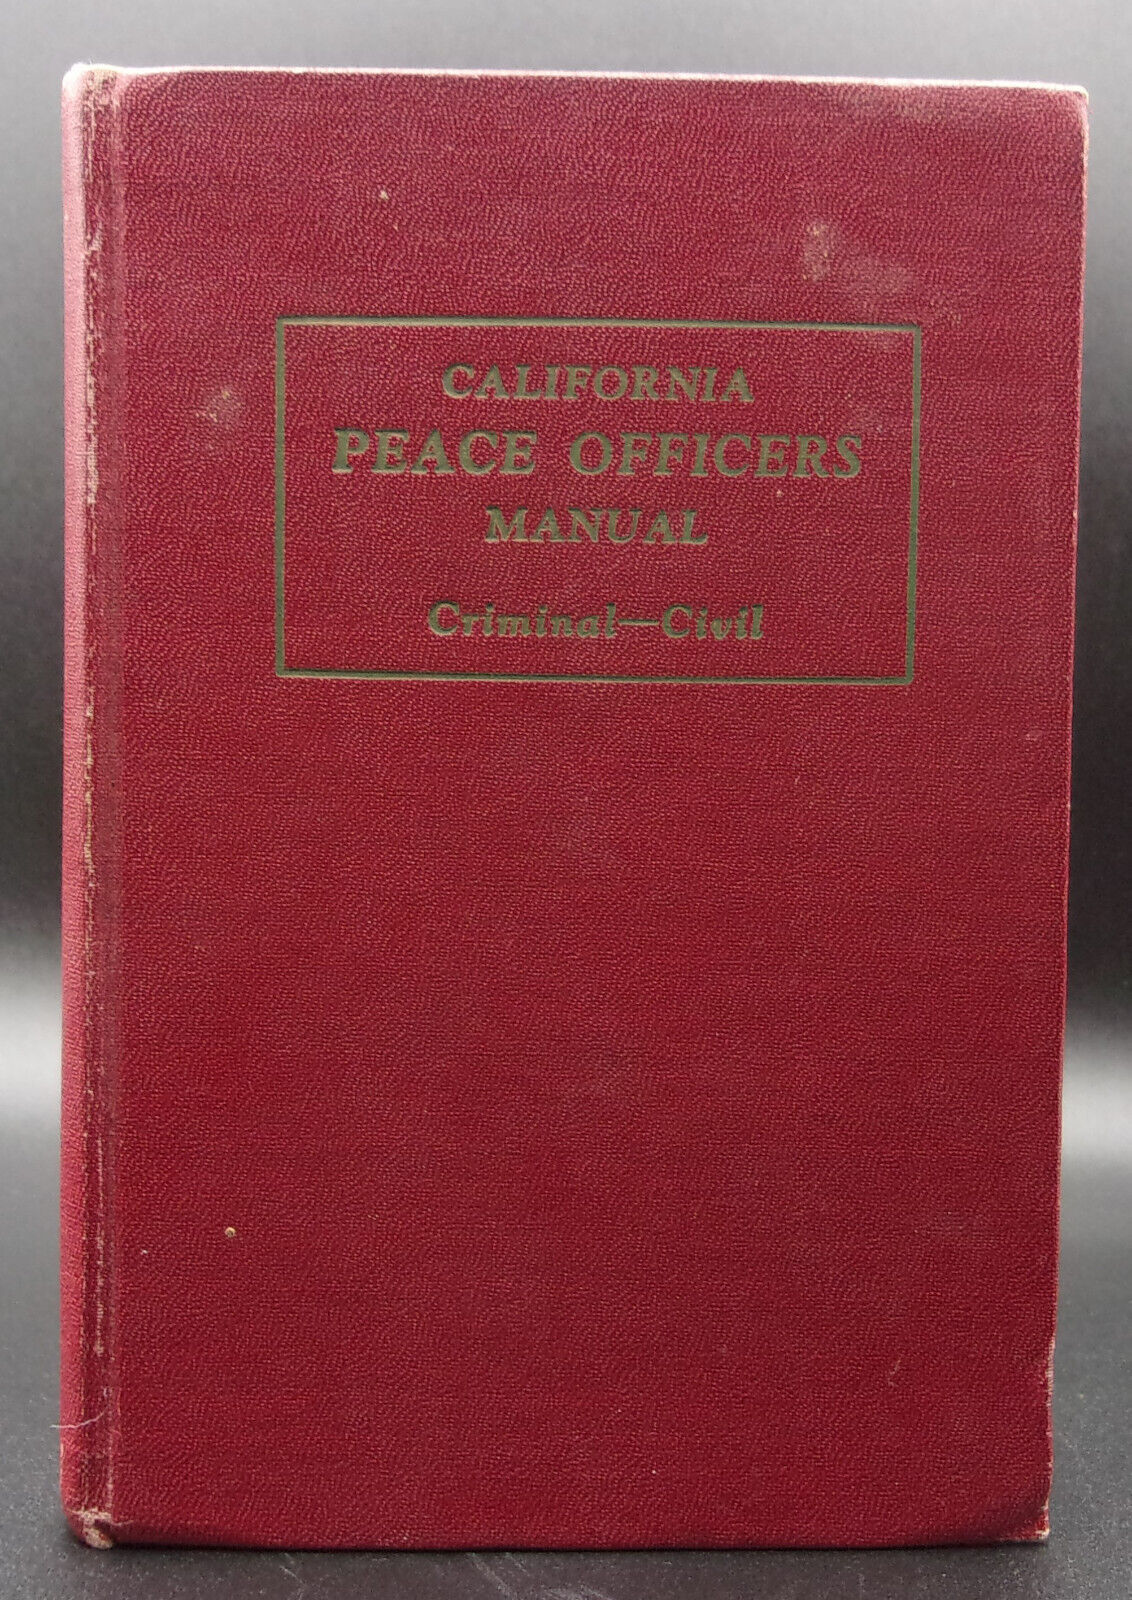 Primary image for CALIFORNIA PEACE OFFICERS MANUAL CRIMINAL & CIVIL 1953 Hardcover Police Law